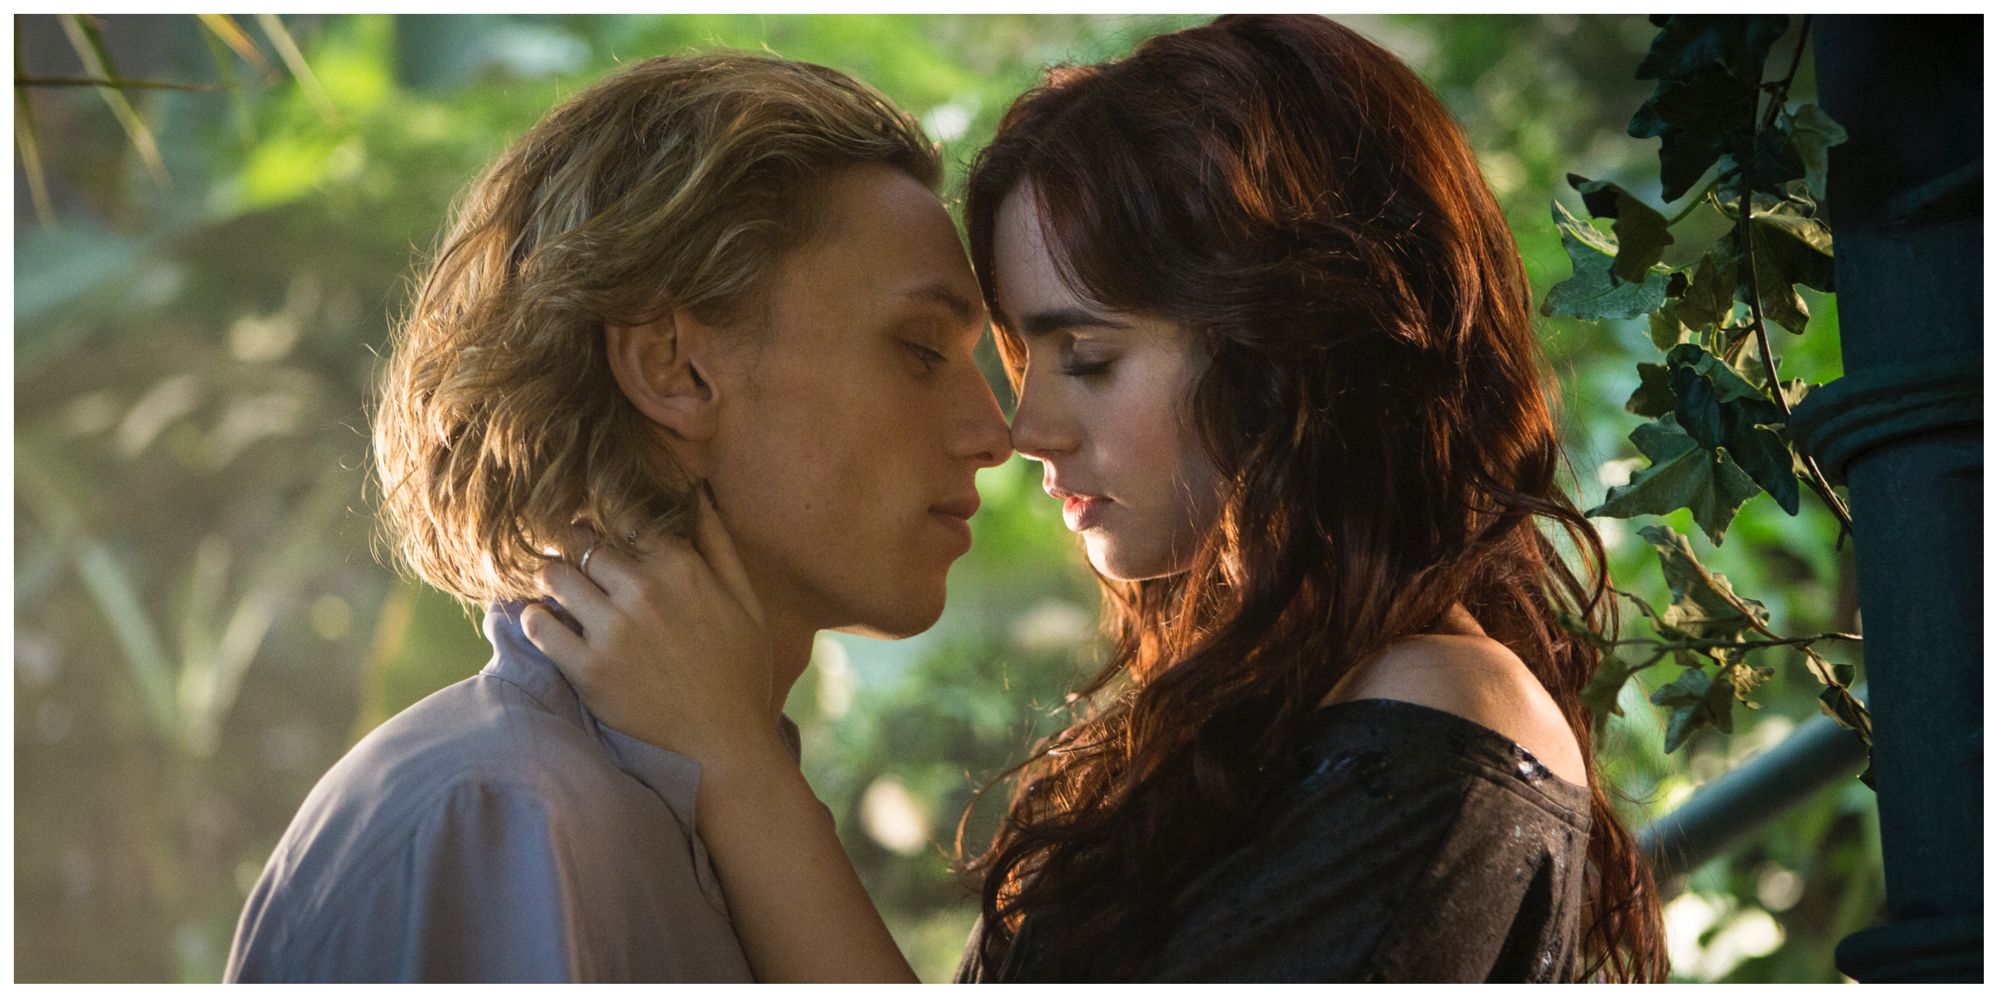 Jace played by Jamie Campbell with Lily Collins The Mortal Instruments